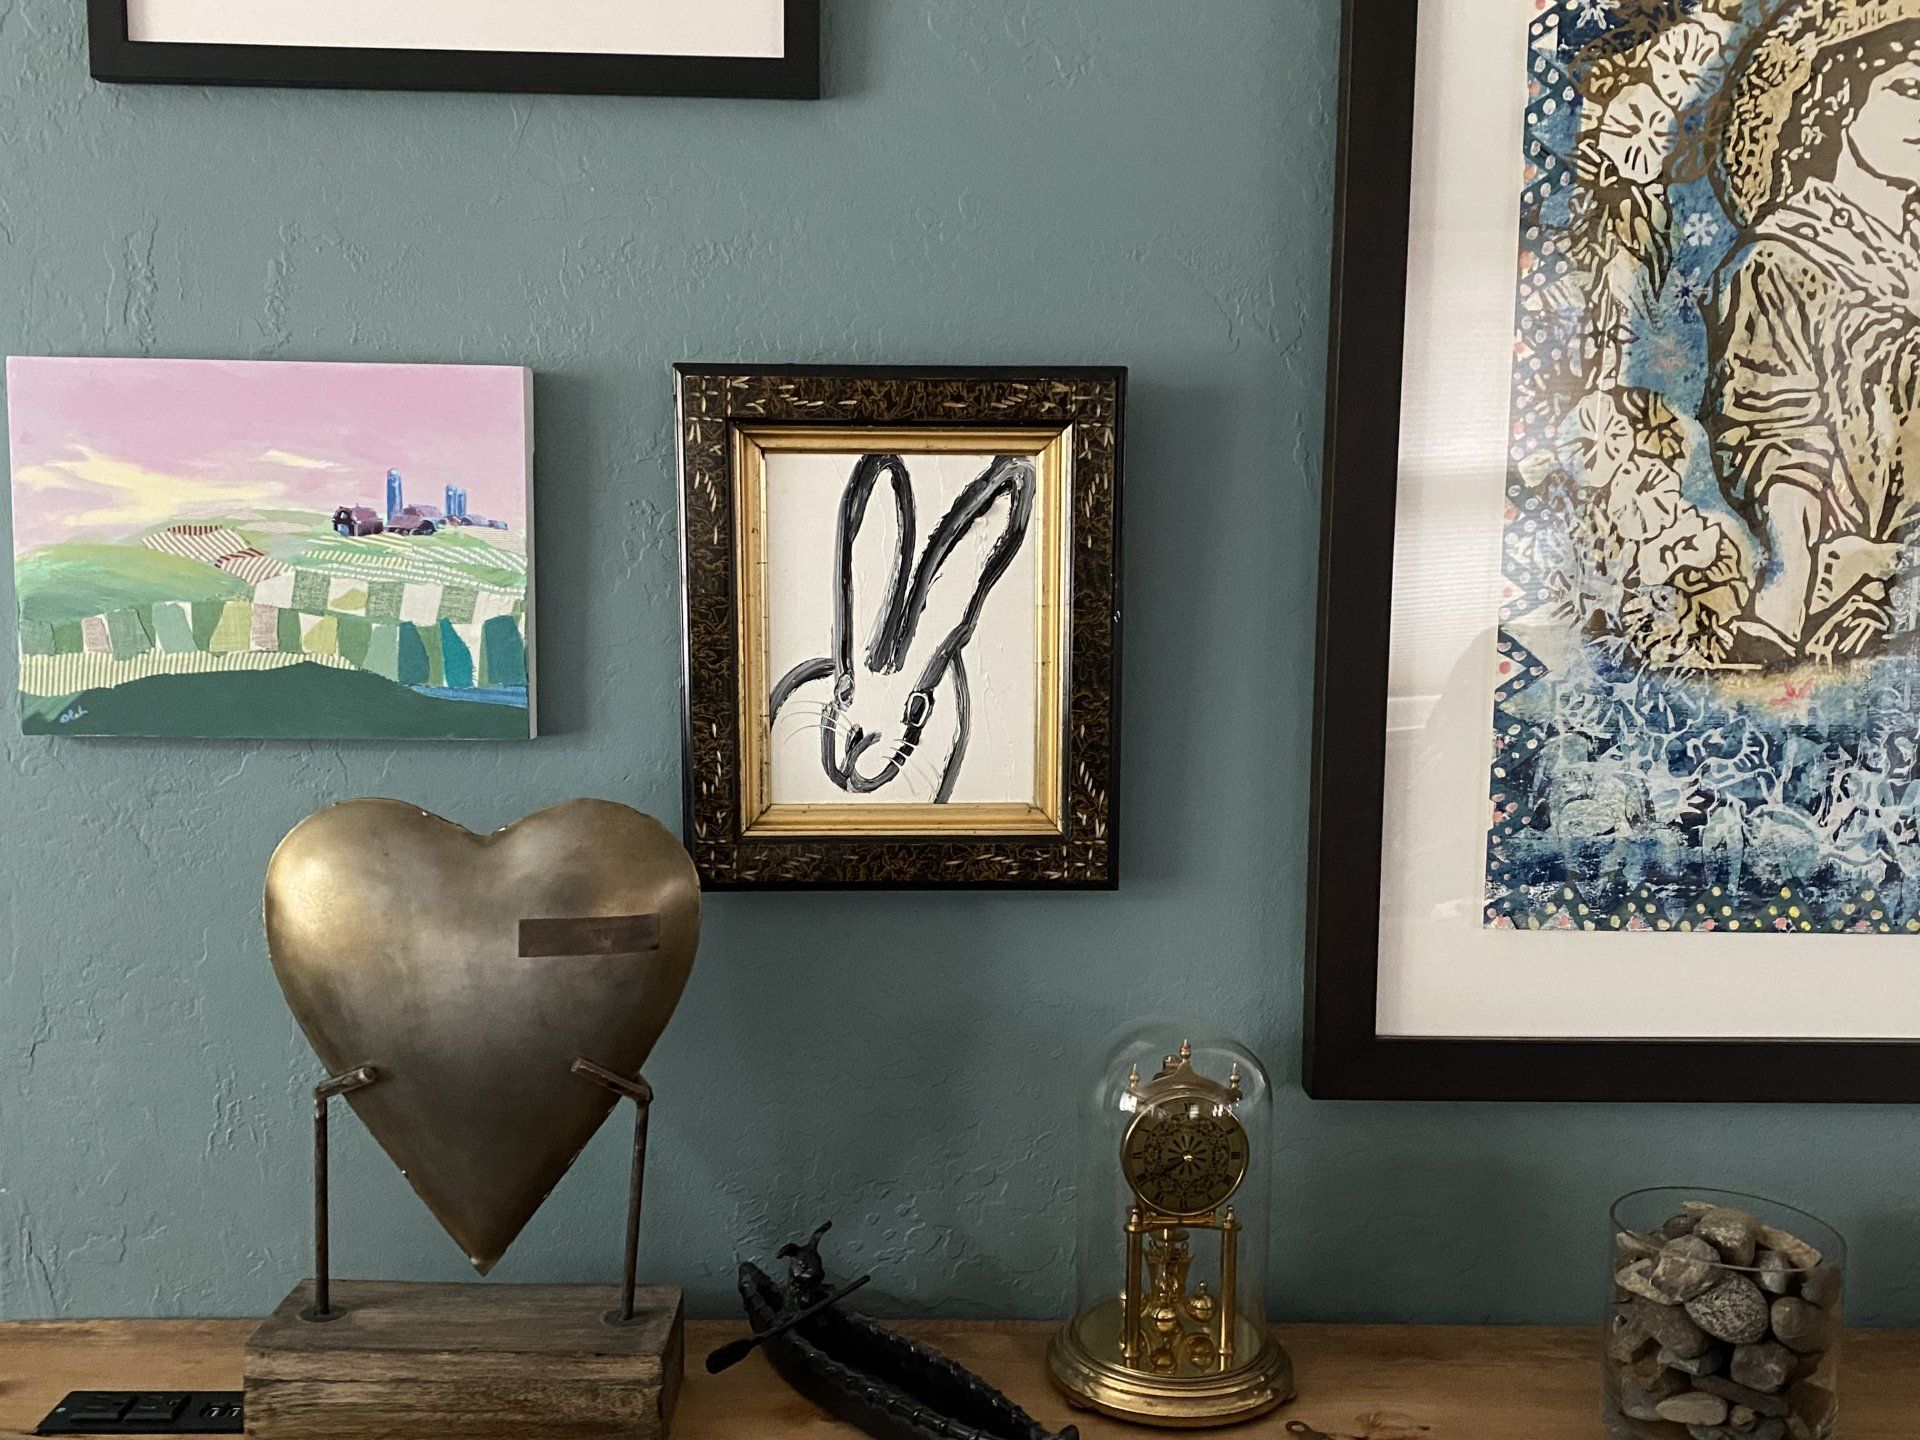 California Collector, Aubrey, fills her space with art